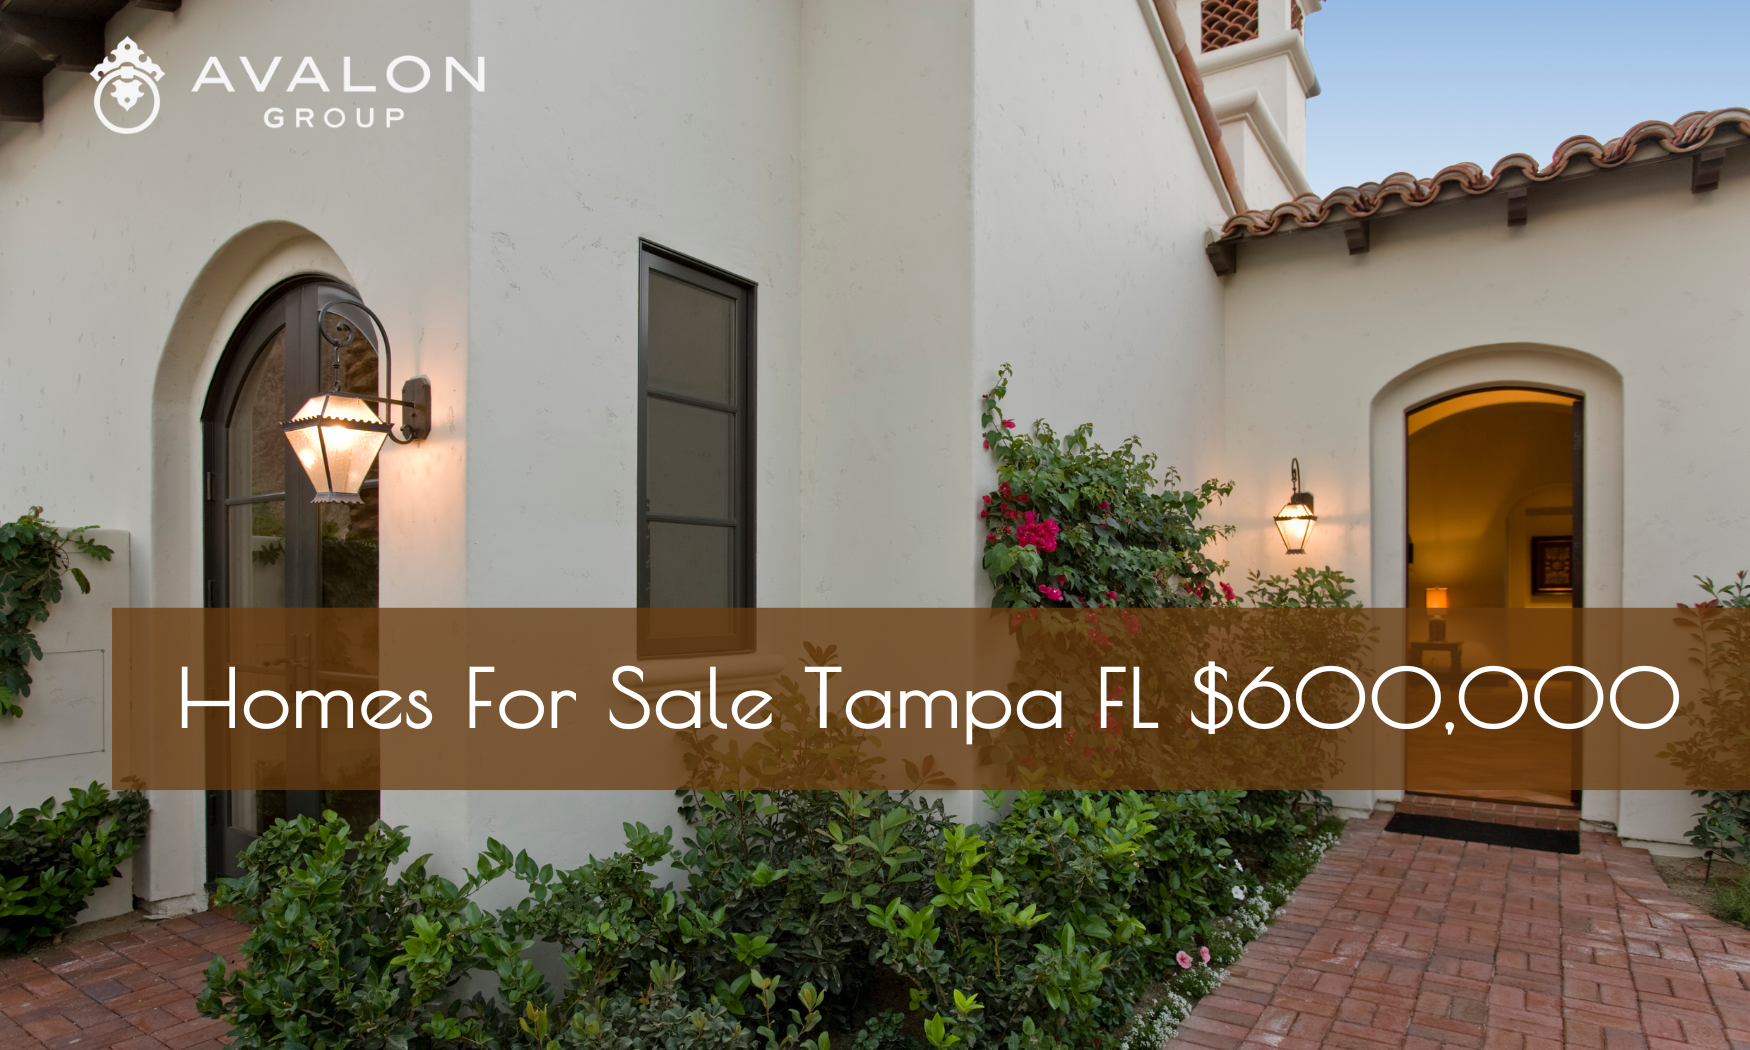 Homes For Sale Tampa Cover Pic shows a white stucco classic home with black windows.